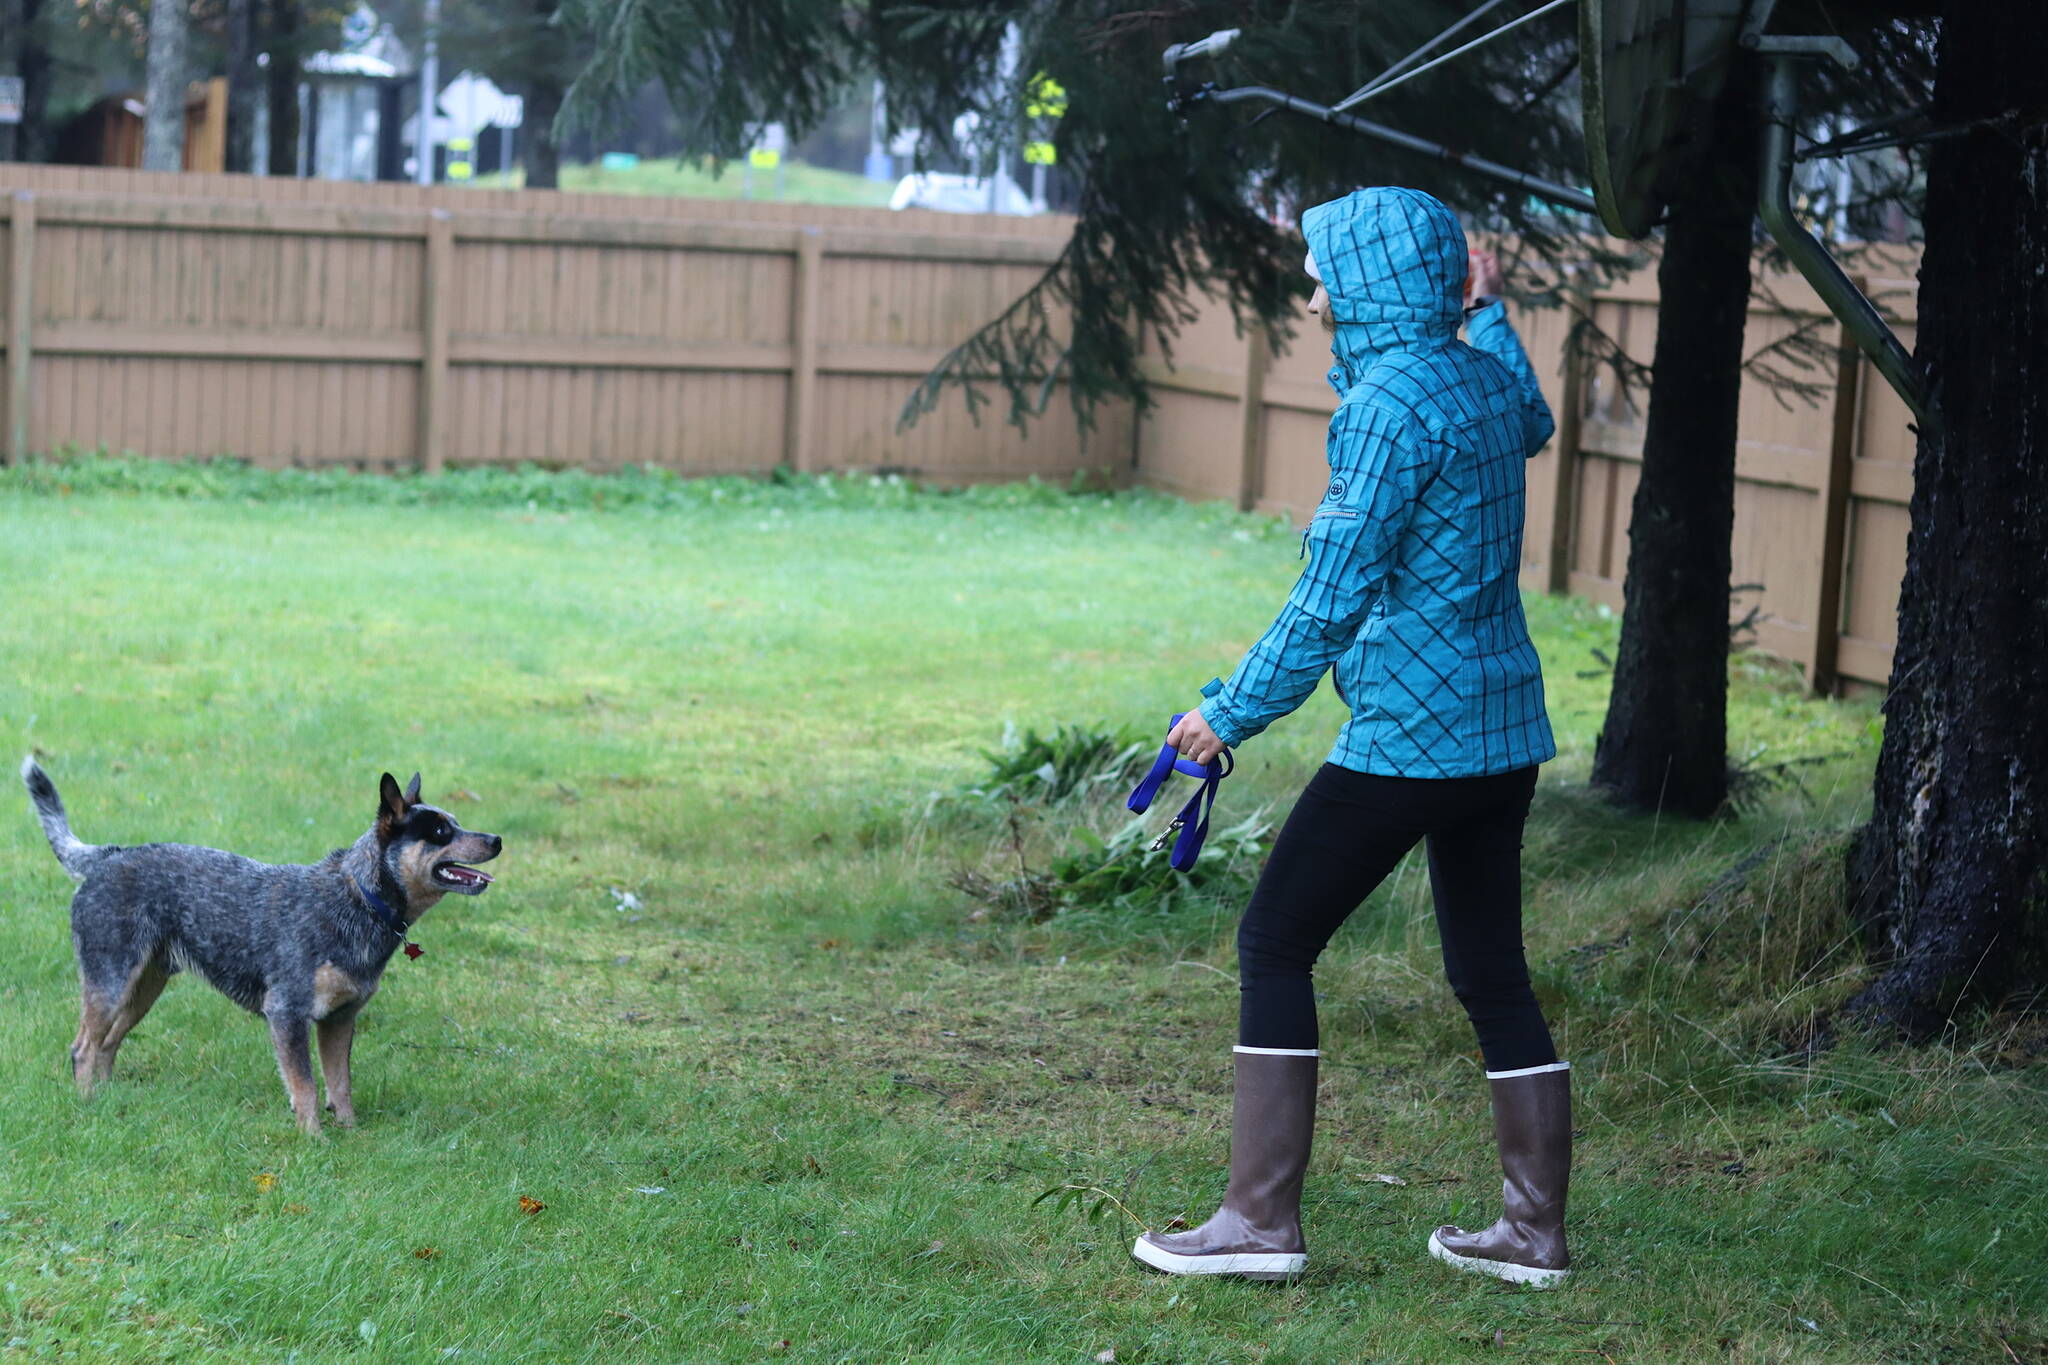 Olena Pomynalnyi tosses a ball to a dog in the back yard of the Mendenhall Valley home her family hopes to live in for at least the next two years. (Mark Sabbatini / Juneau Empire)